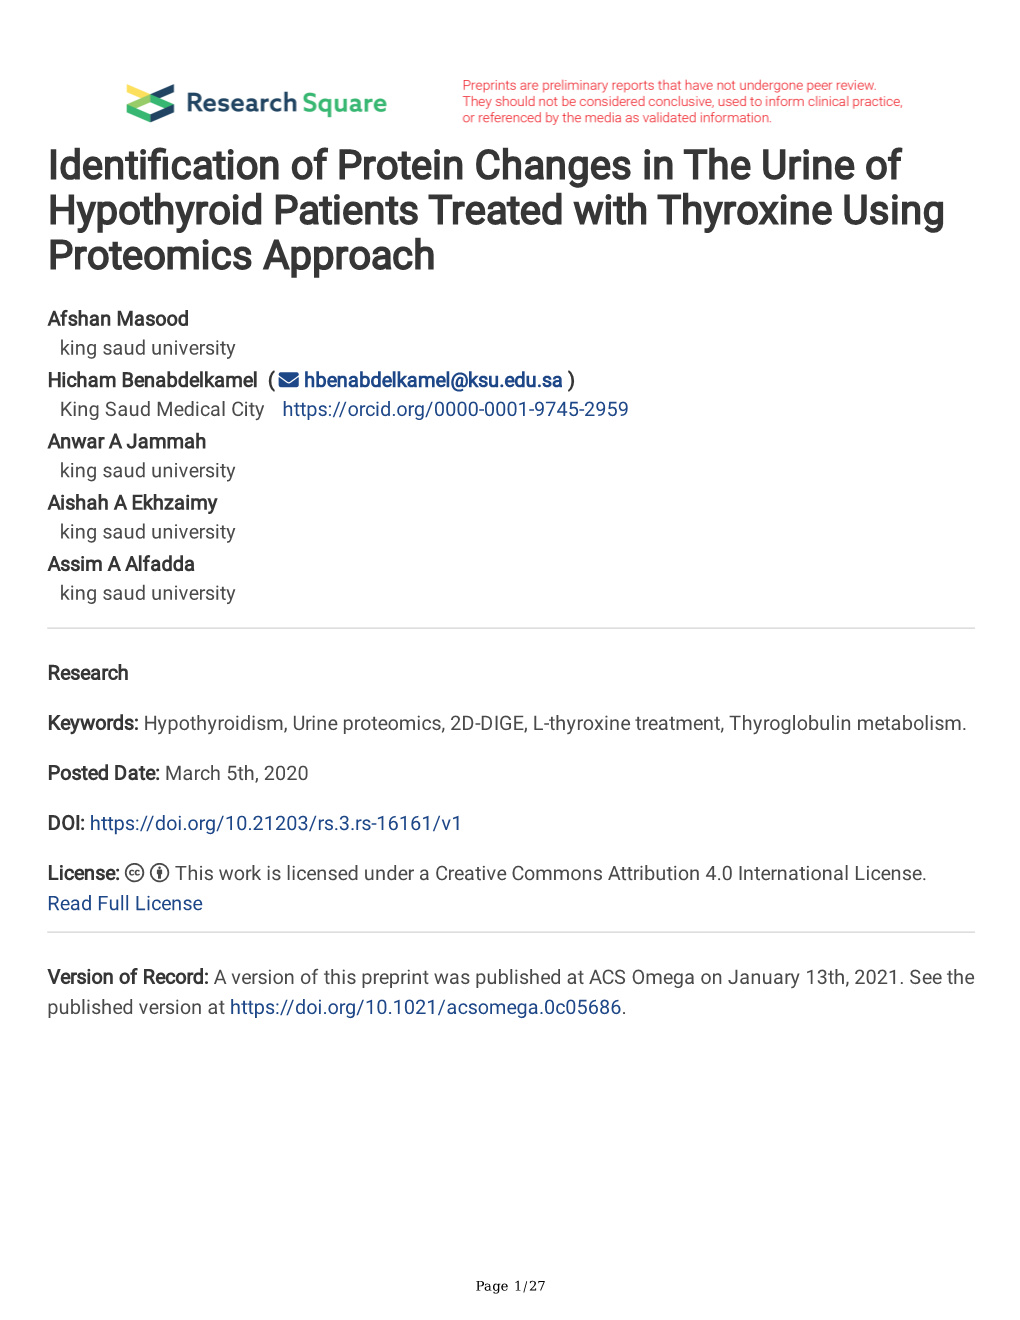 Identi Cation of Protein Changes in the Urine of Hypothyroid Patients